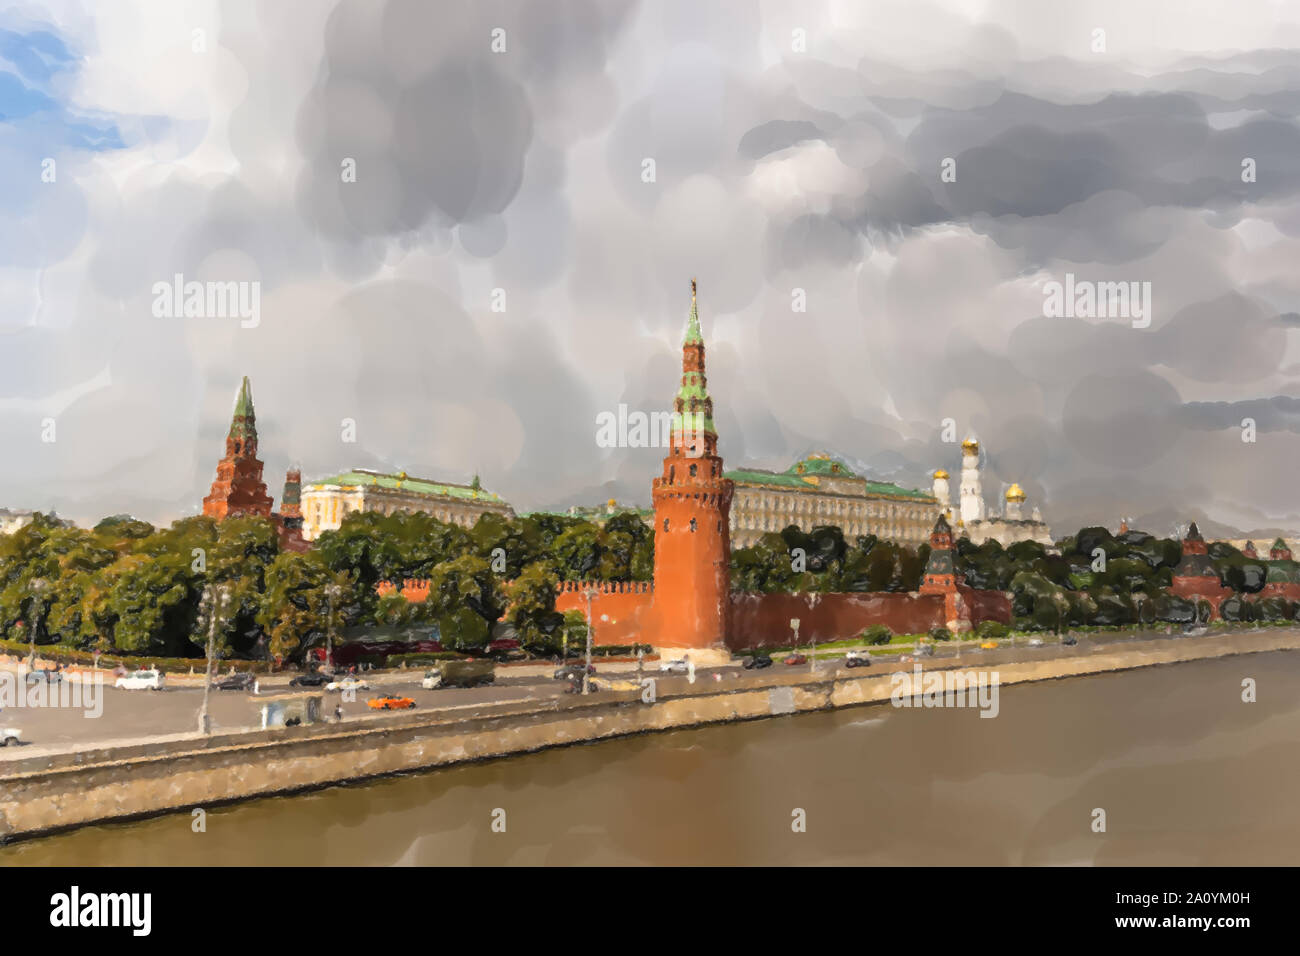 View of the Moscow Kremlin, Russia - Watercolor style. Stock Photo